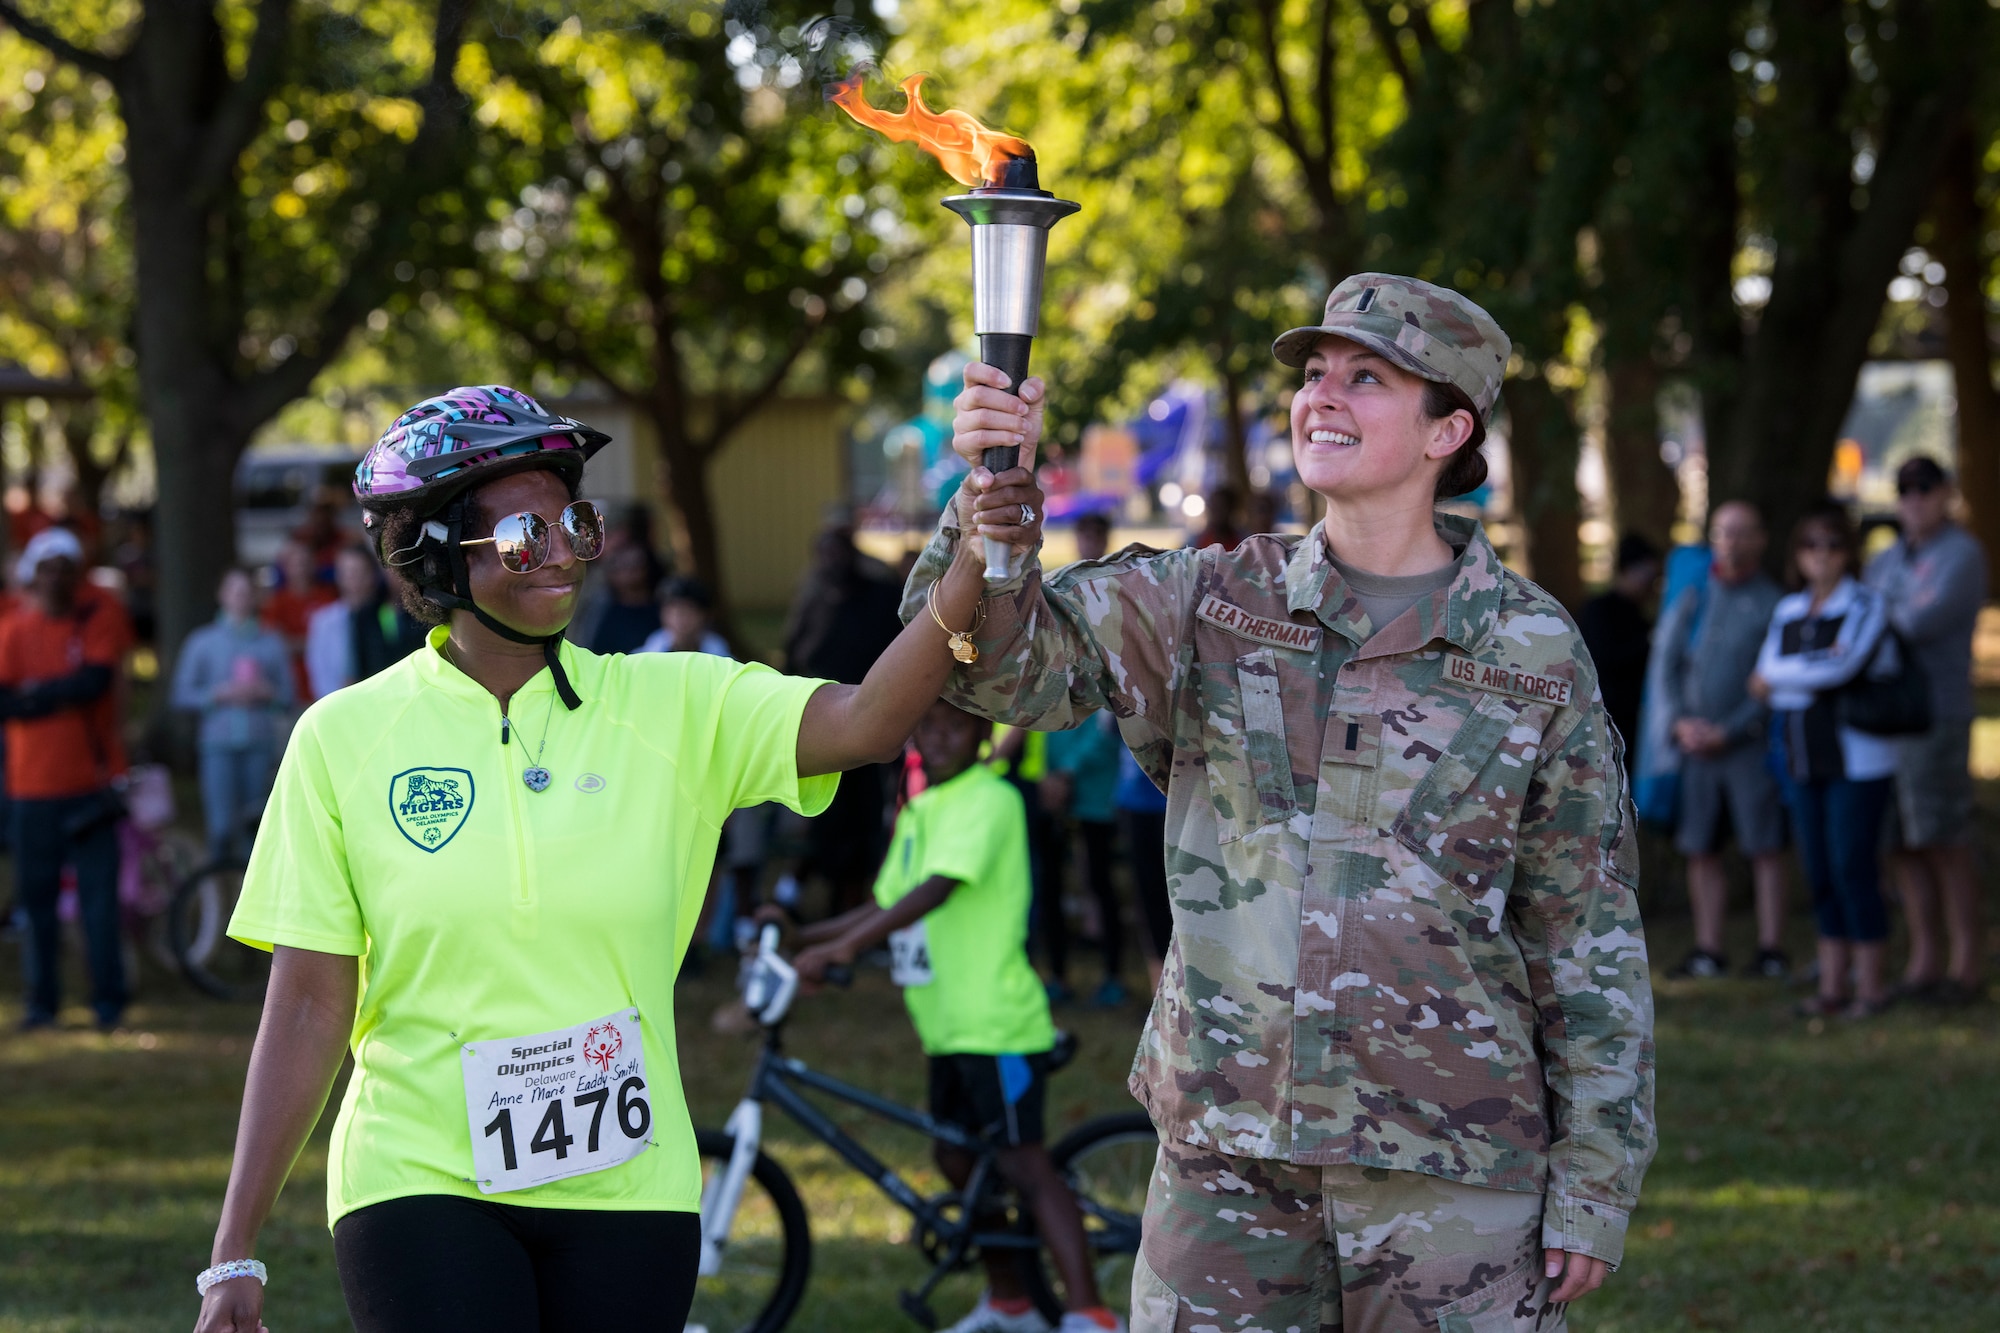 (Right) 1st Lt. Jamie Leatherman, 436th Aircraft Maintenance Squadron, holds the torch with contestant Anne Marie Eaddie-Smith during the Special Olympics Delaware 2019 cycling tournament Sept. 21, 2019, at Dover Air Force Base, Del. More than 100 volunteers came together to help make this event possible. (U.S. Air Force photo by Senior Airman Christopher Quail)